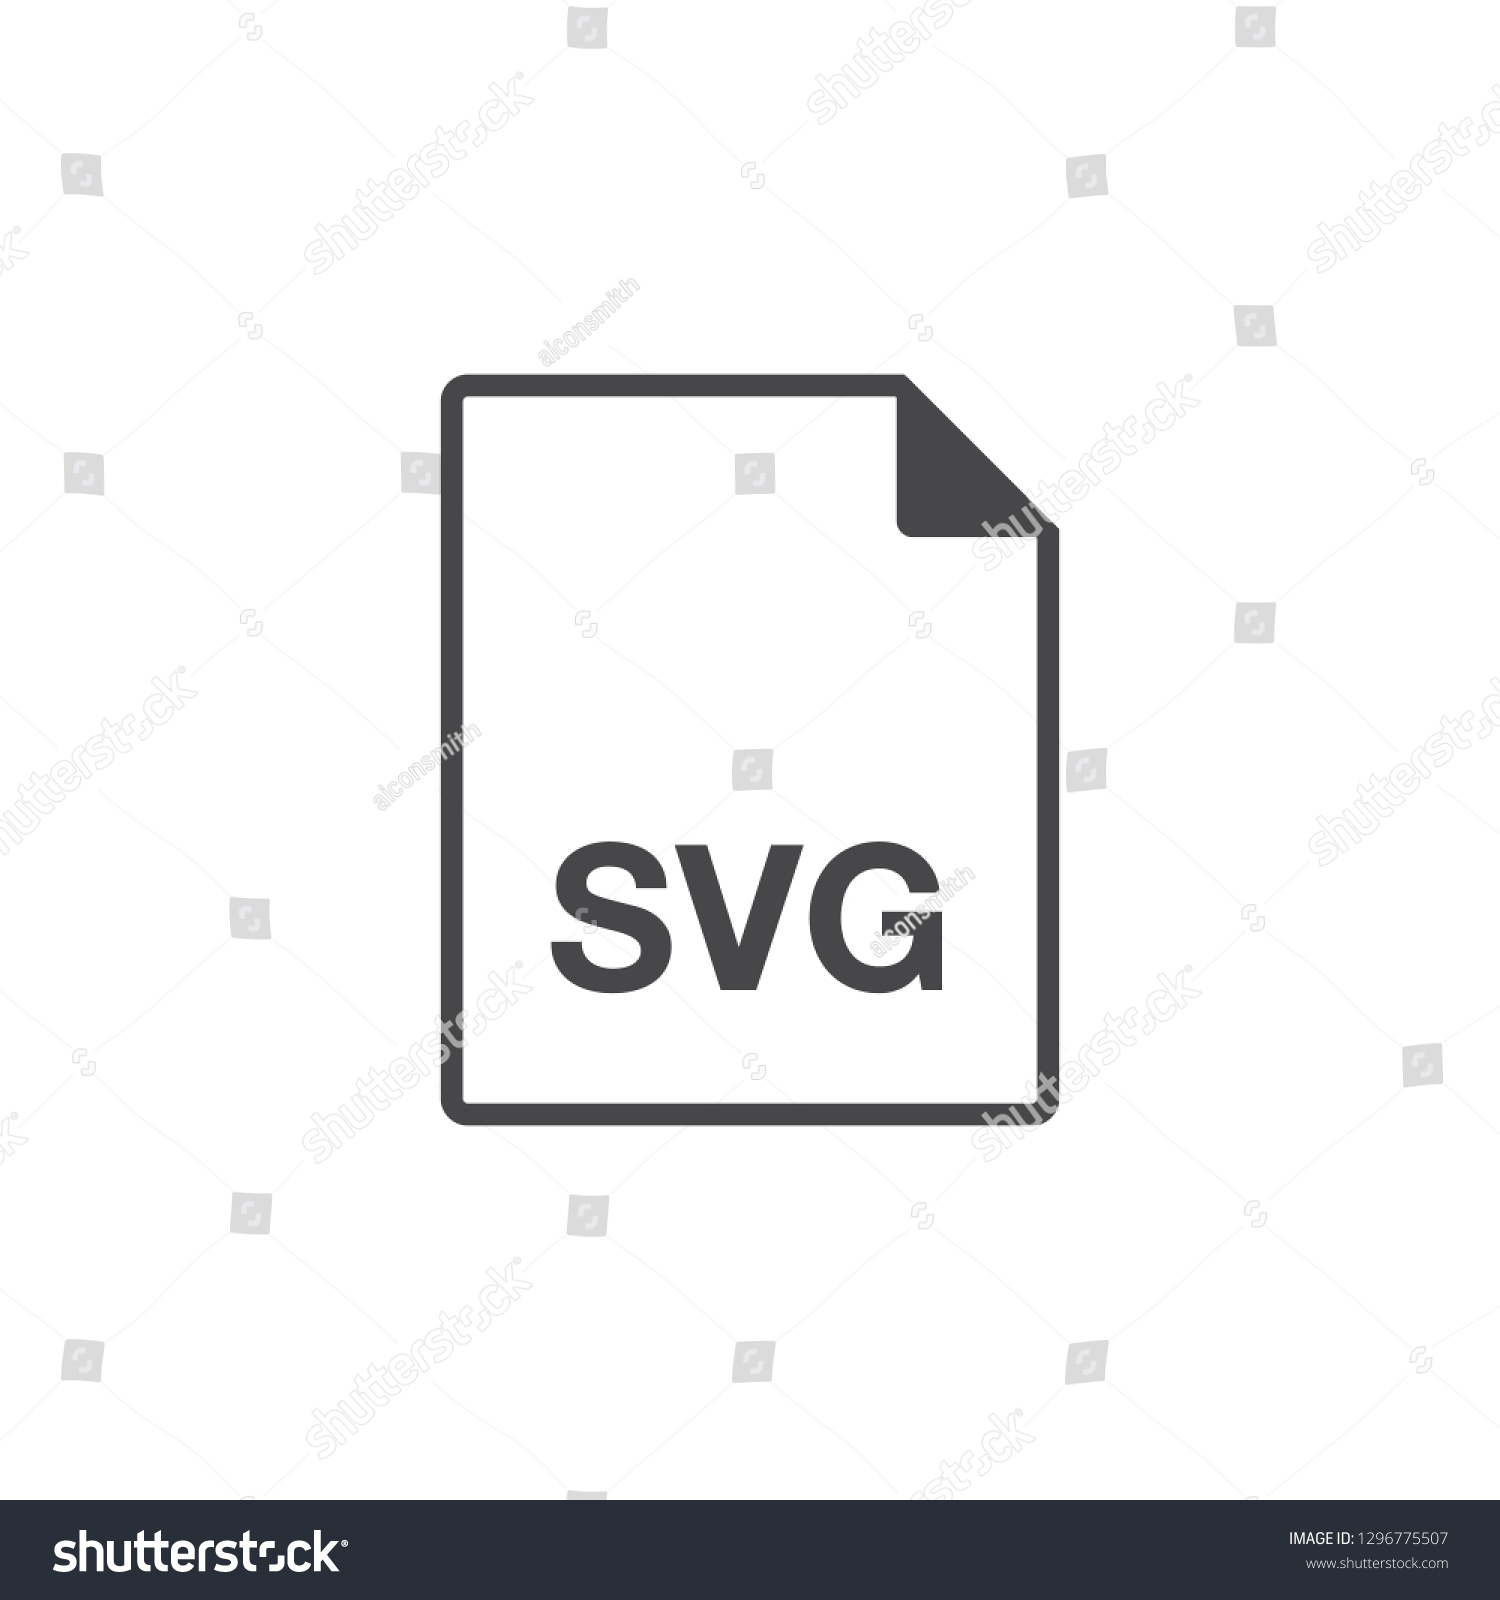 SVG of Black single thin line svg document file format icon set. Simple flat design vector infographic pictogram for app ads web website button ui ux interface elements isolated on white background svg